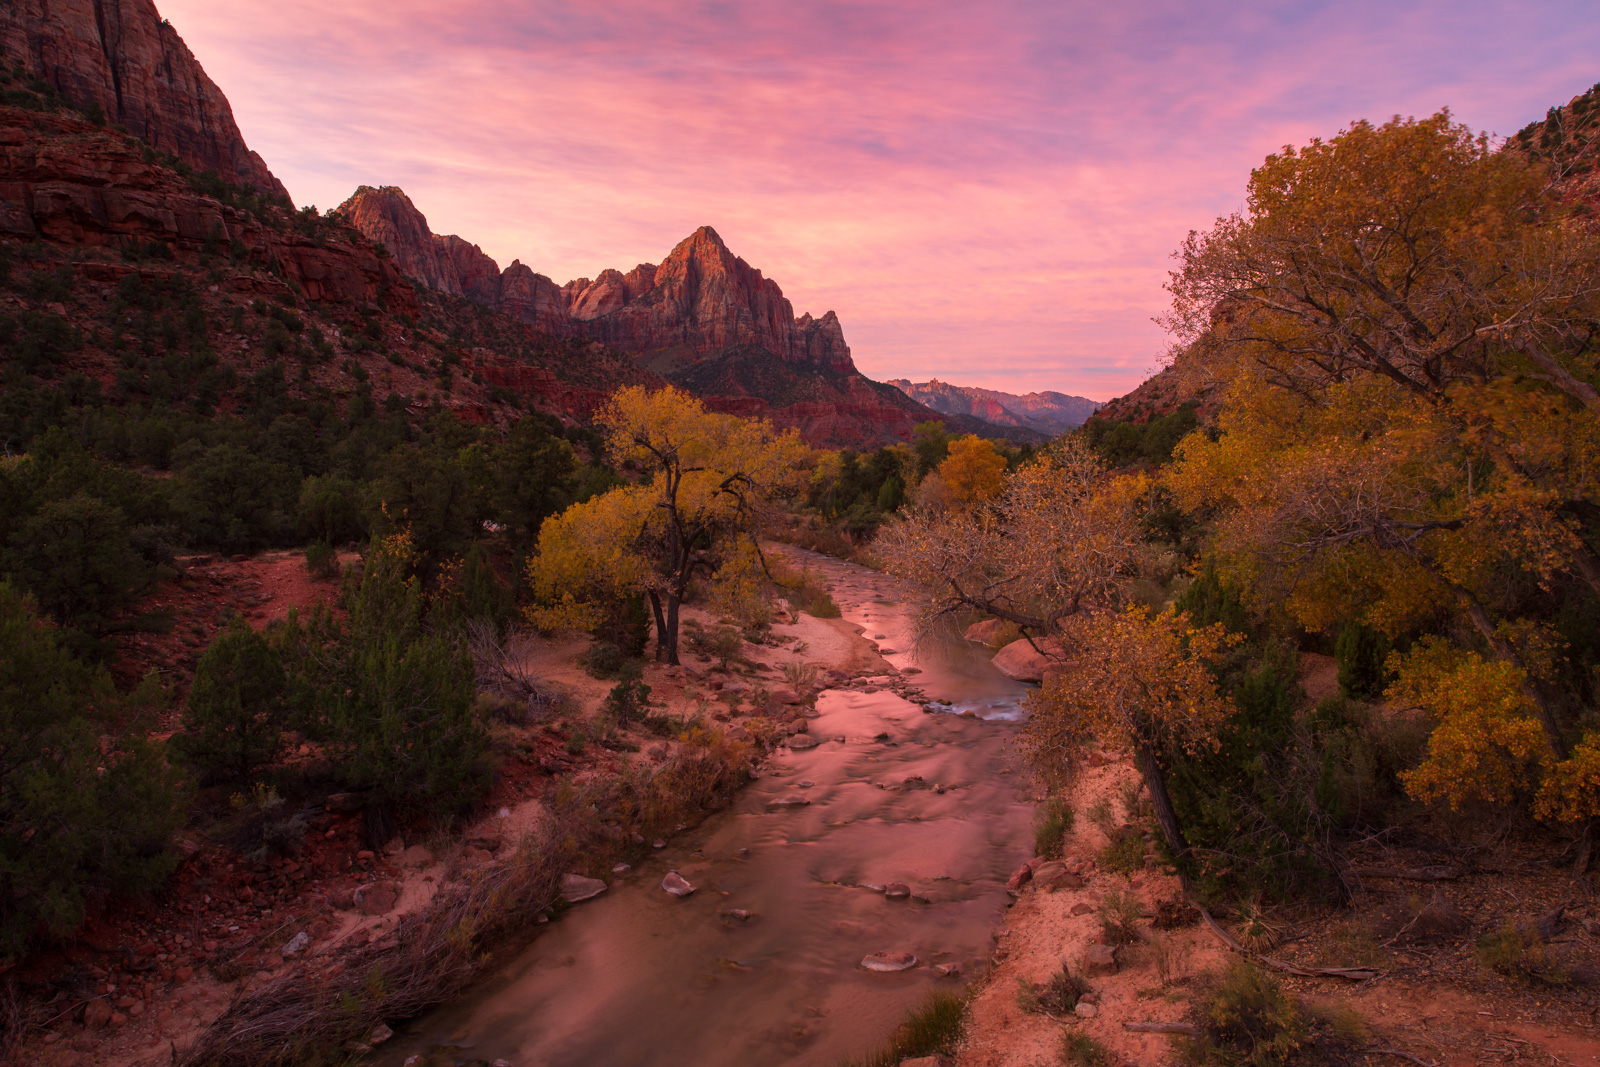 Sunset over the Virgin River with the Watchman in the distance.